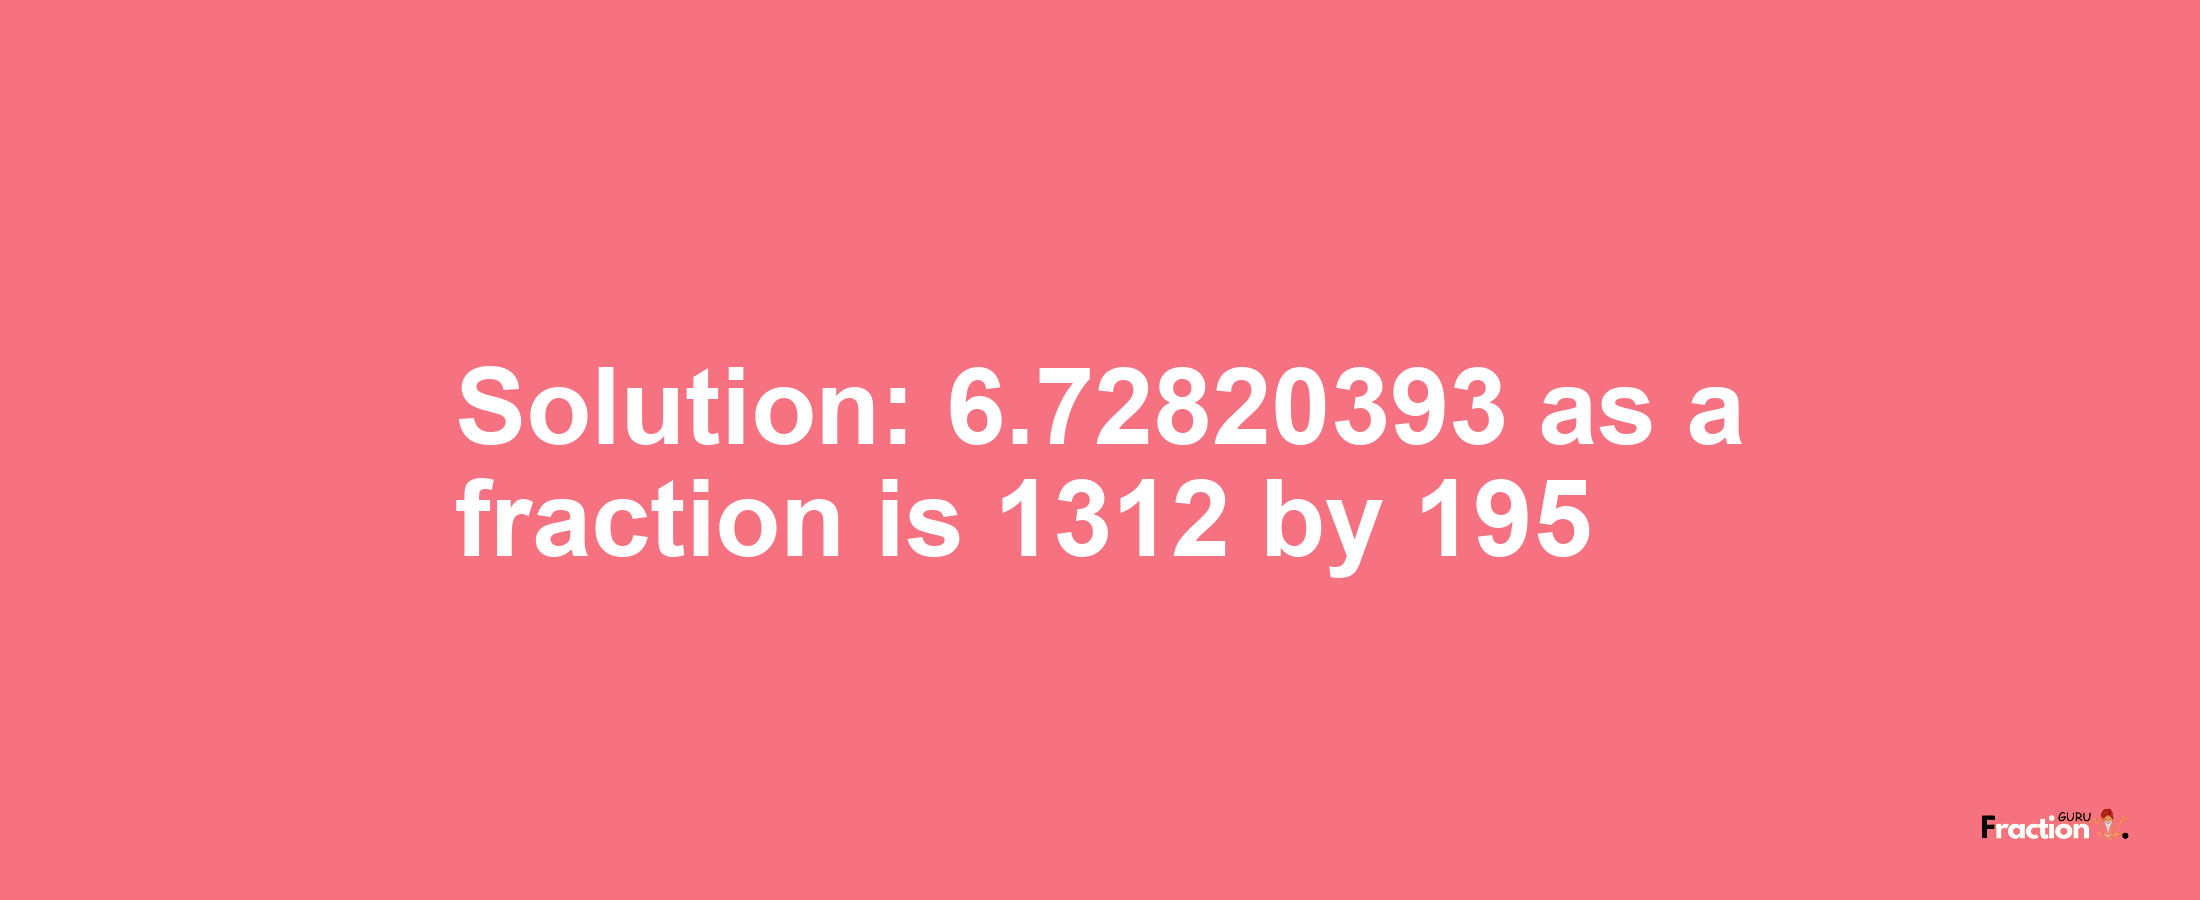 Solution:6.72820393 as a fraction is 1312/195